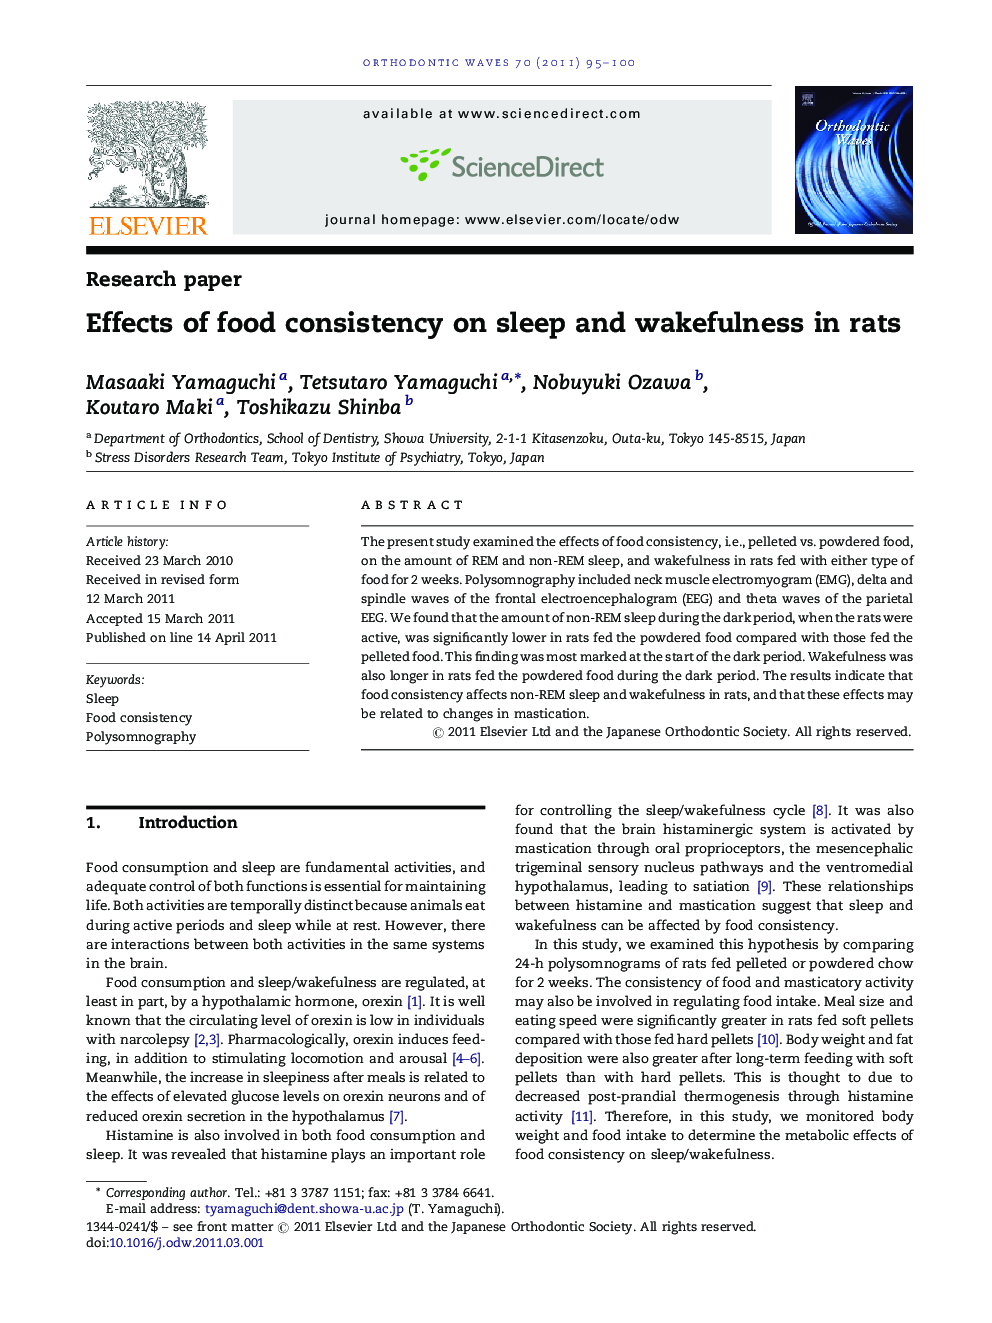 Effects of food consistency on sleep and wakefulness in rats